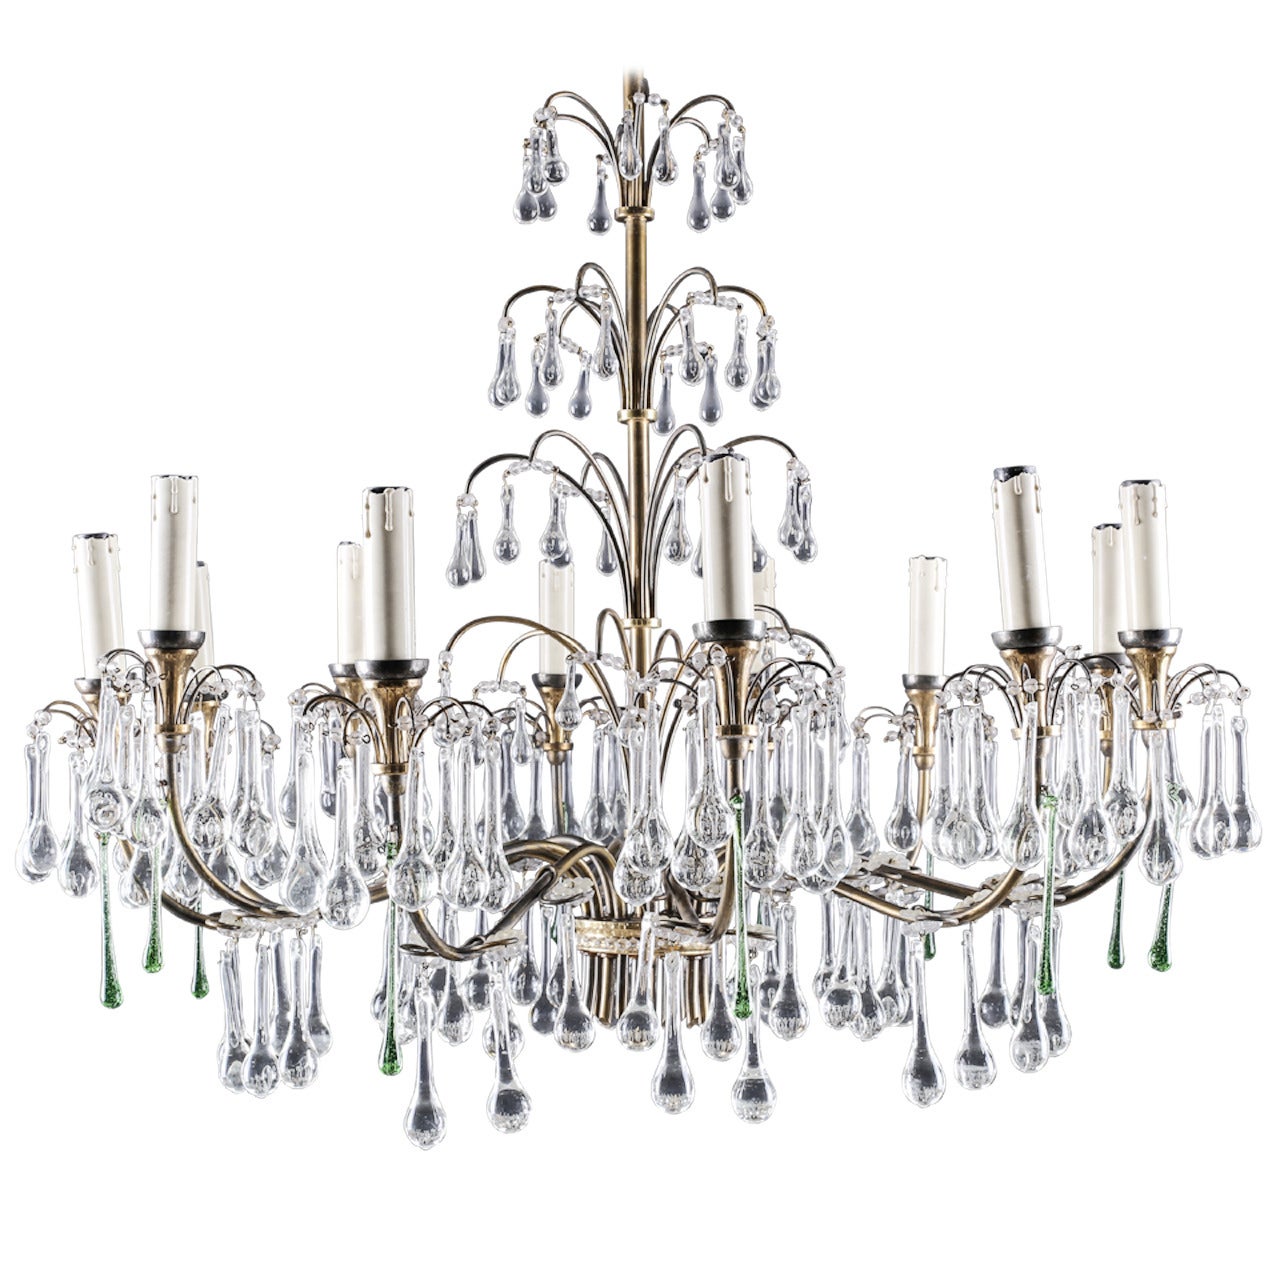 Magnificent Vintage Brass Twelve-Light Chandelier with Murano Glass Tear Drops For Sale